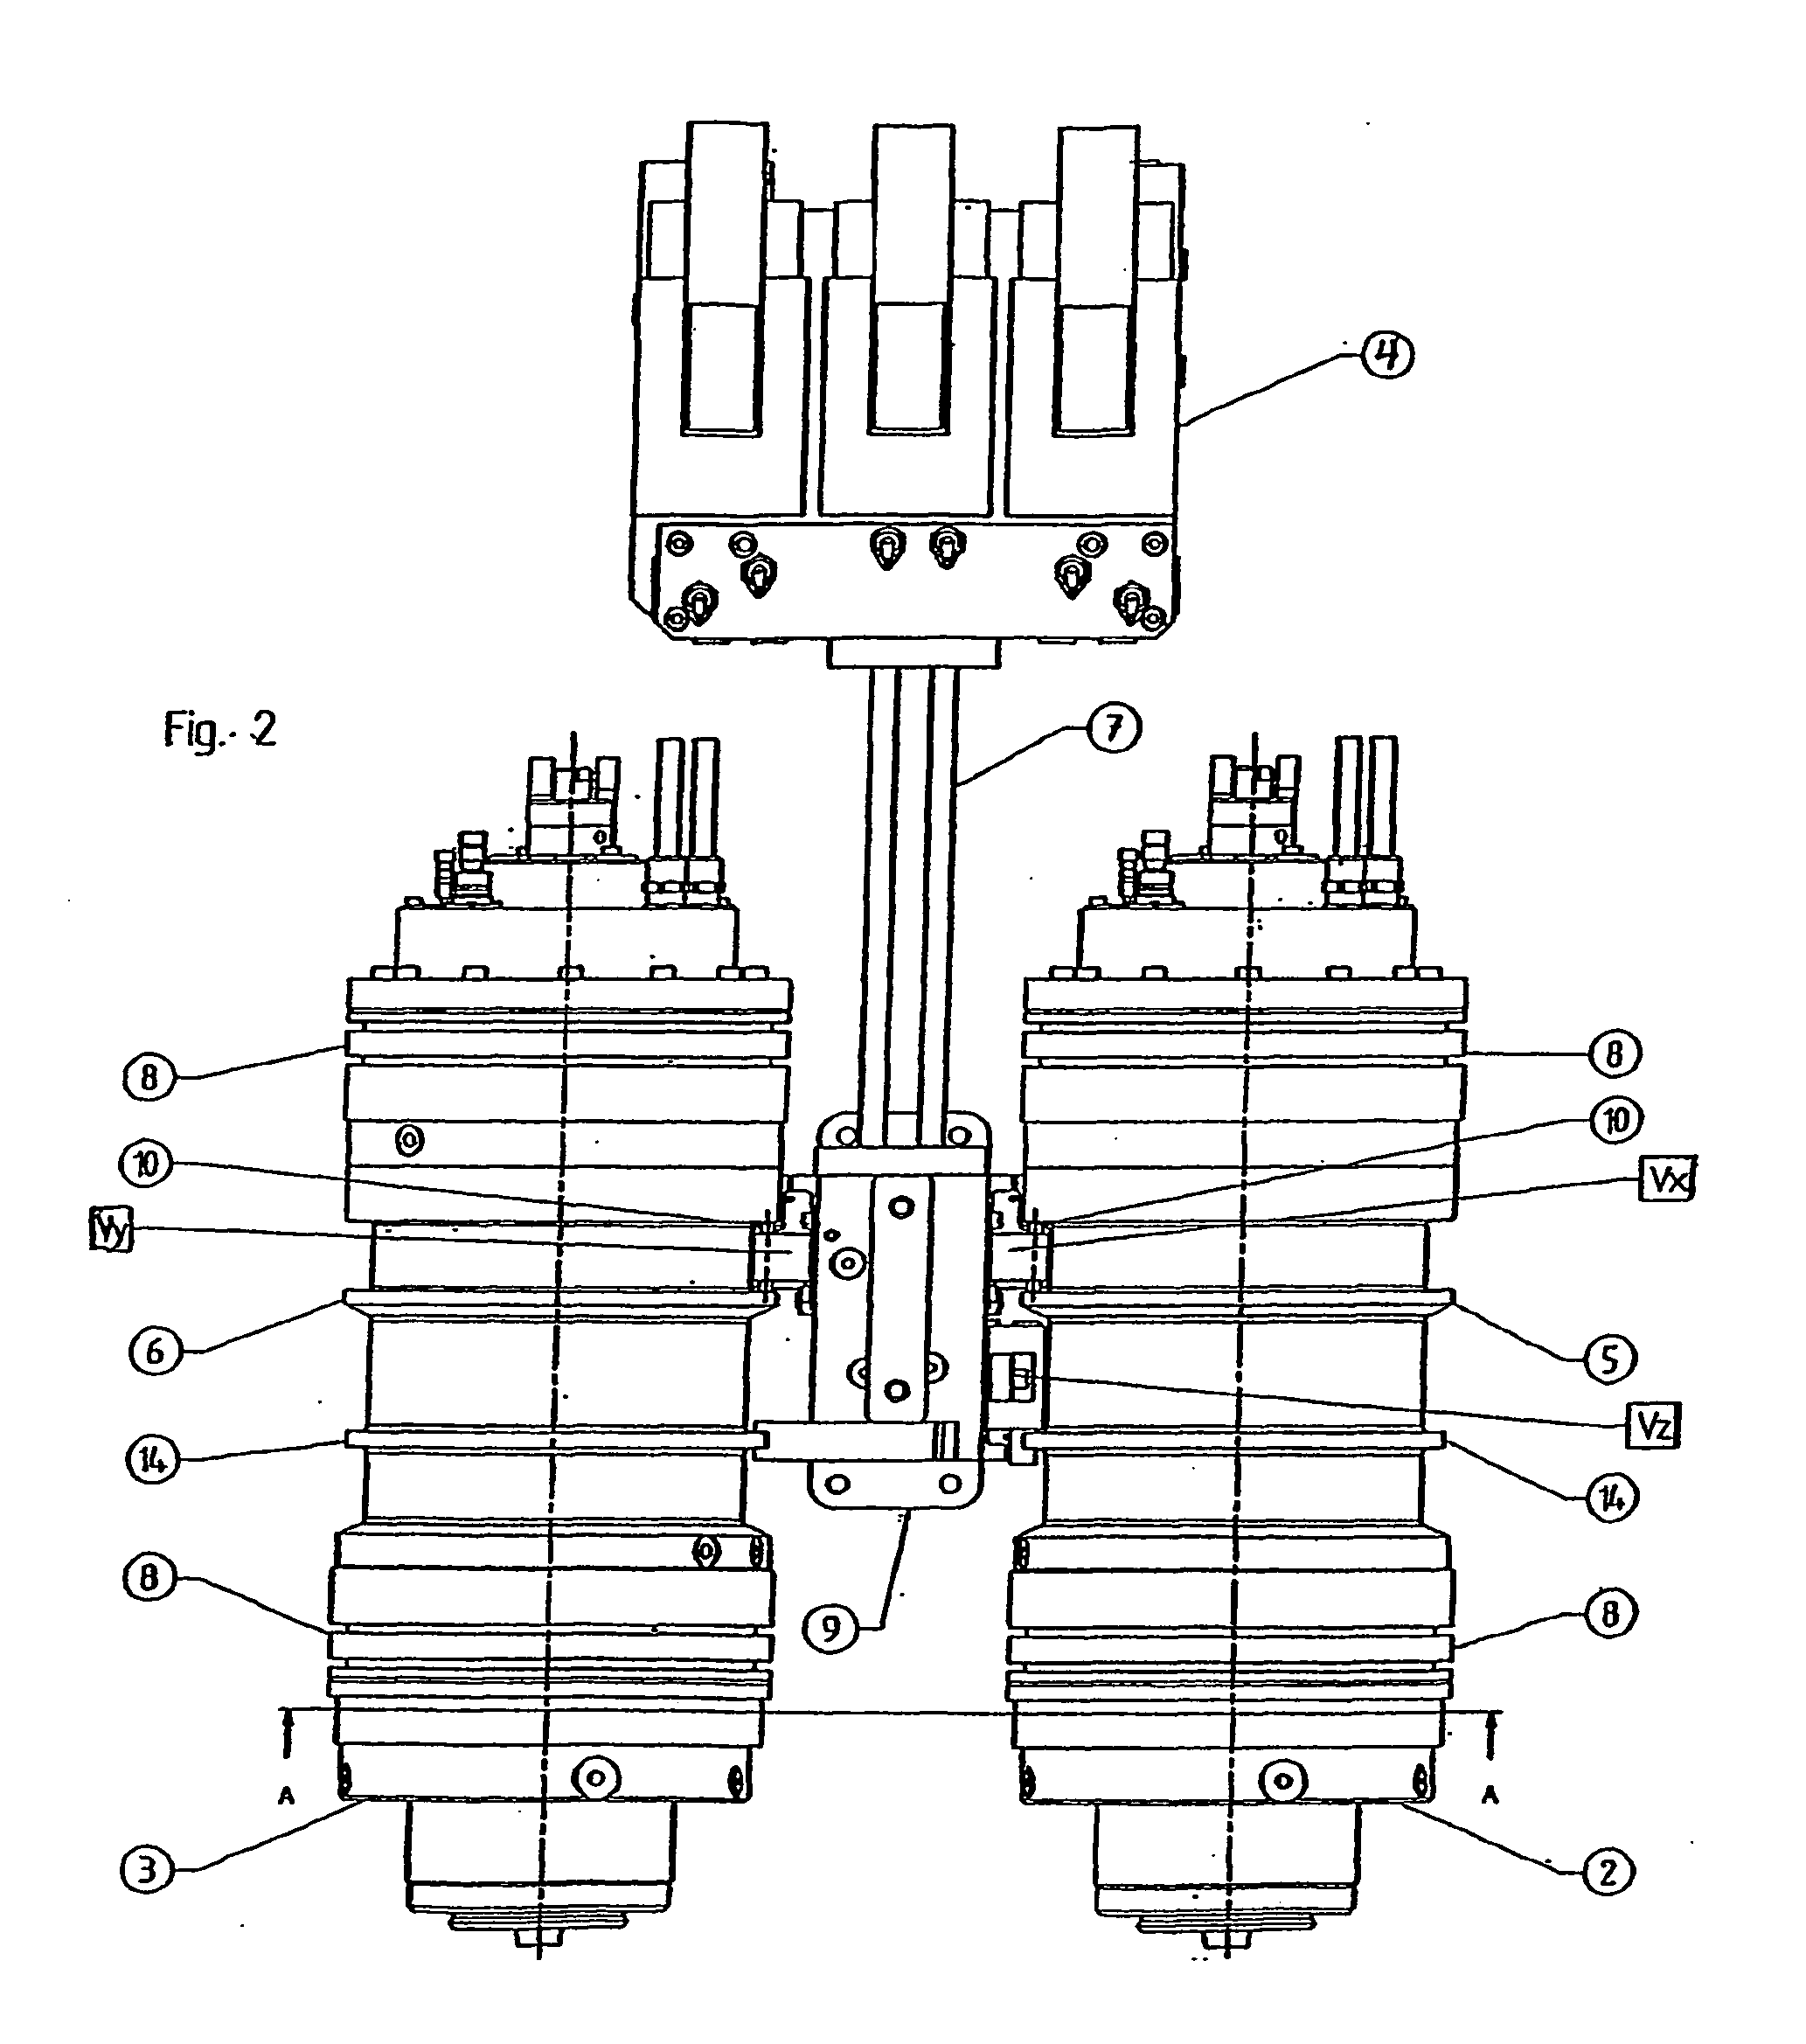 Machine tool comprising parallel tool spindles that can be repositioned in relation to one another